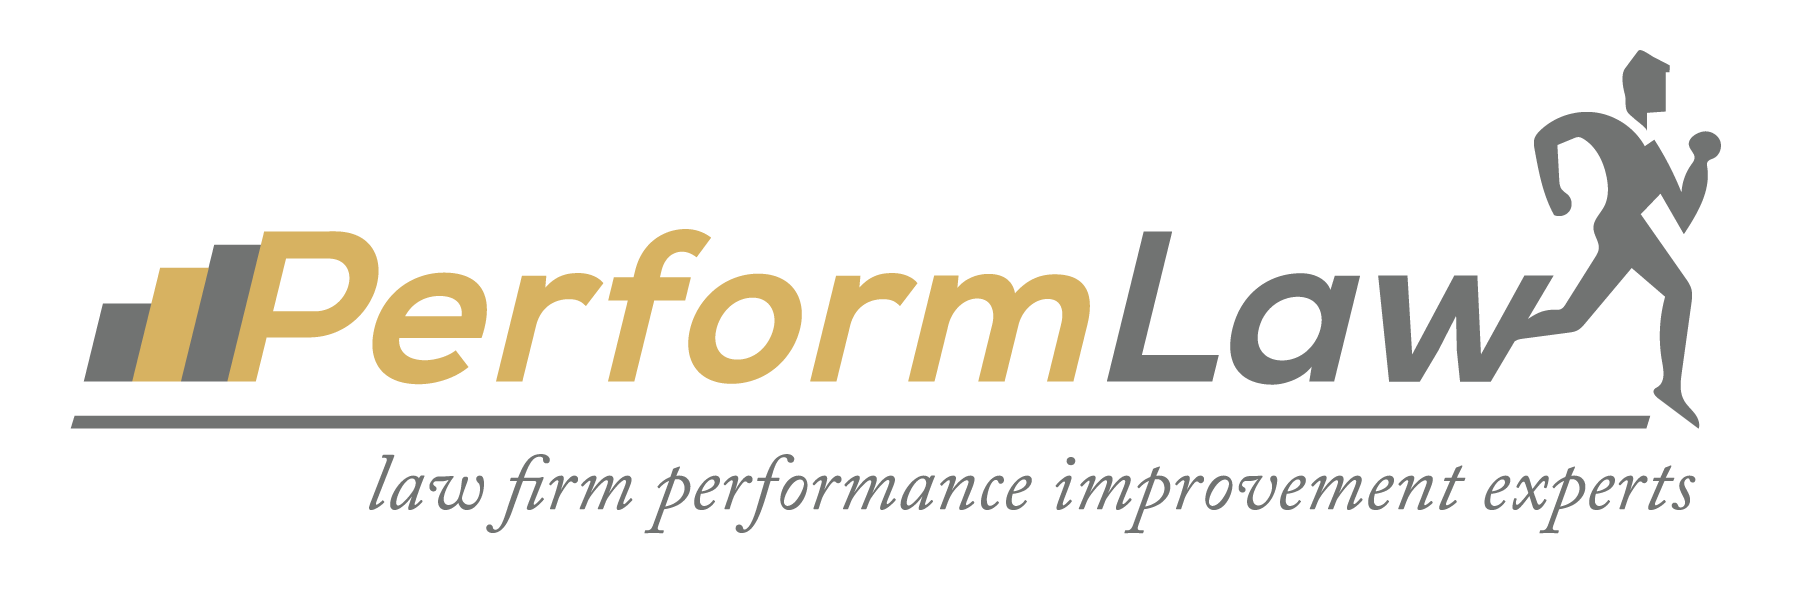 PerformLaw Management Consultants